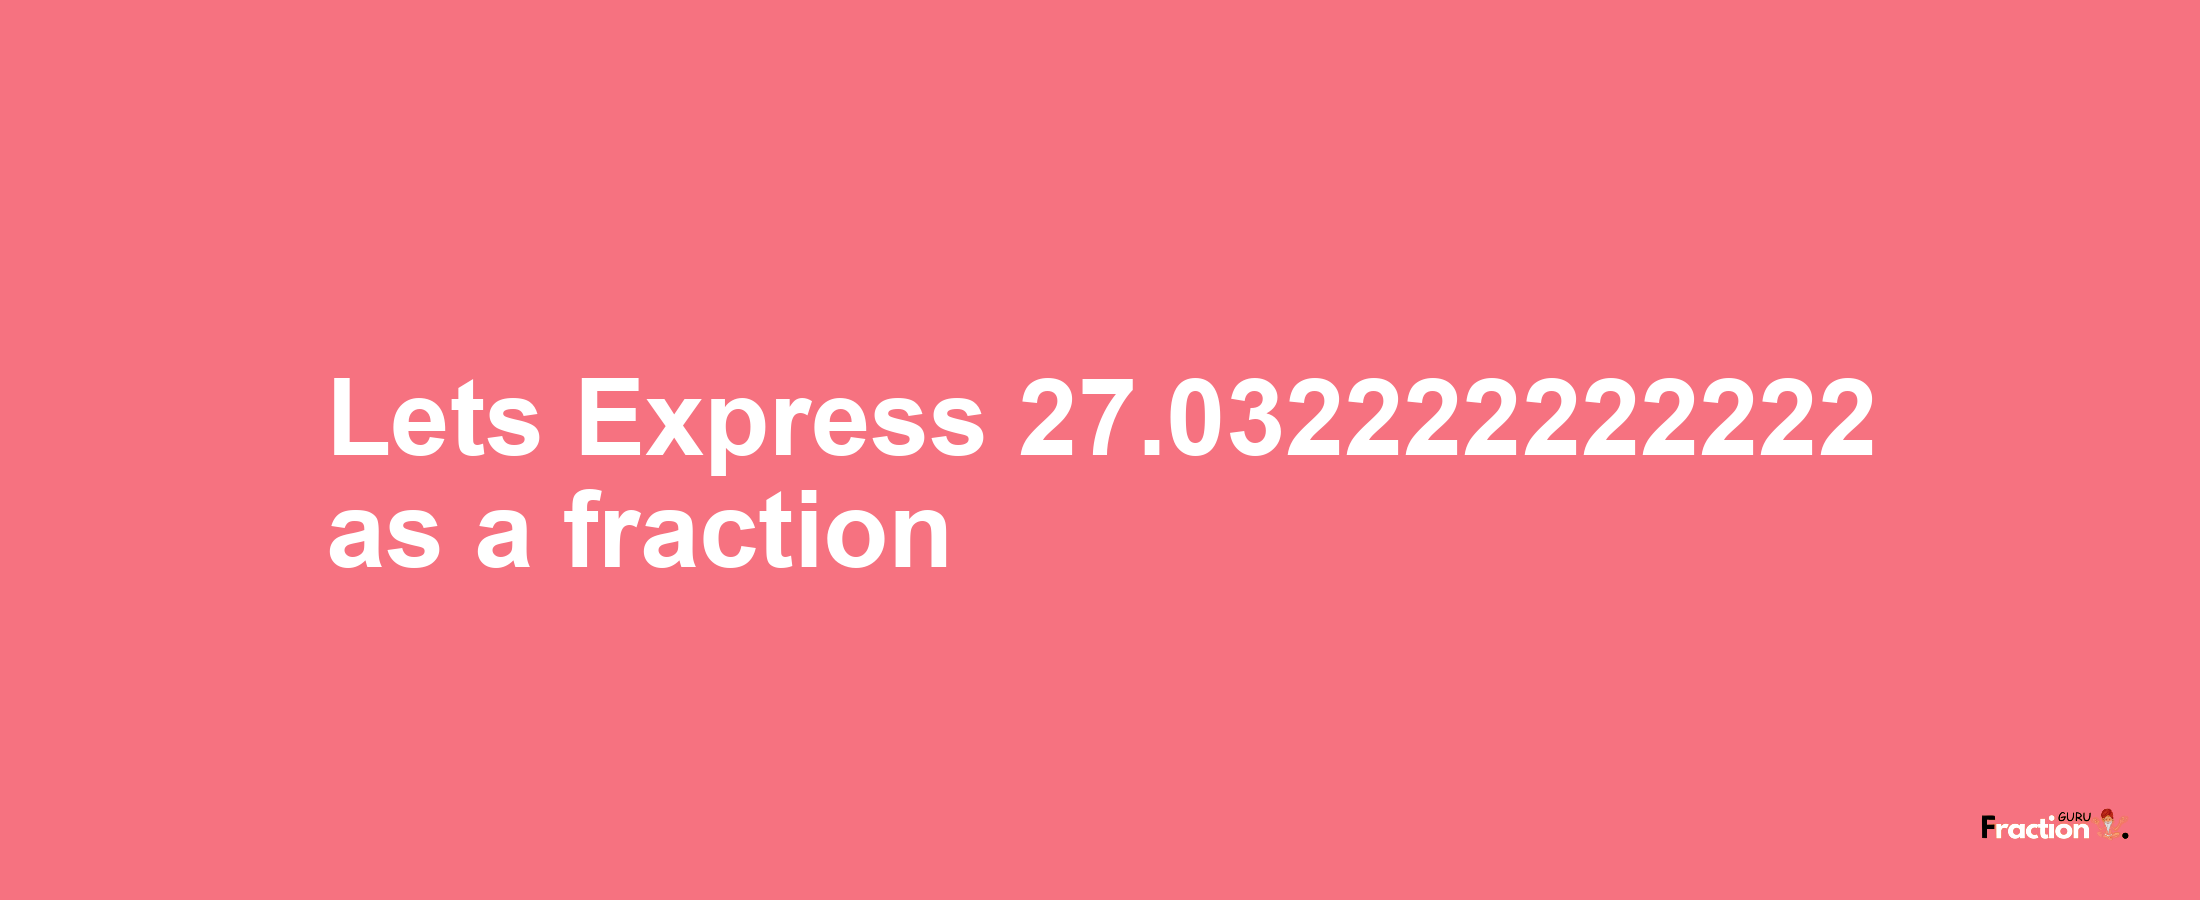 Lets Express 27.032222222222 as afraction